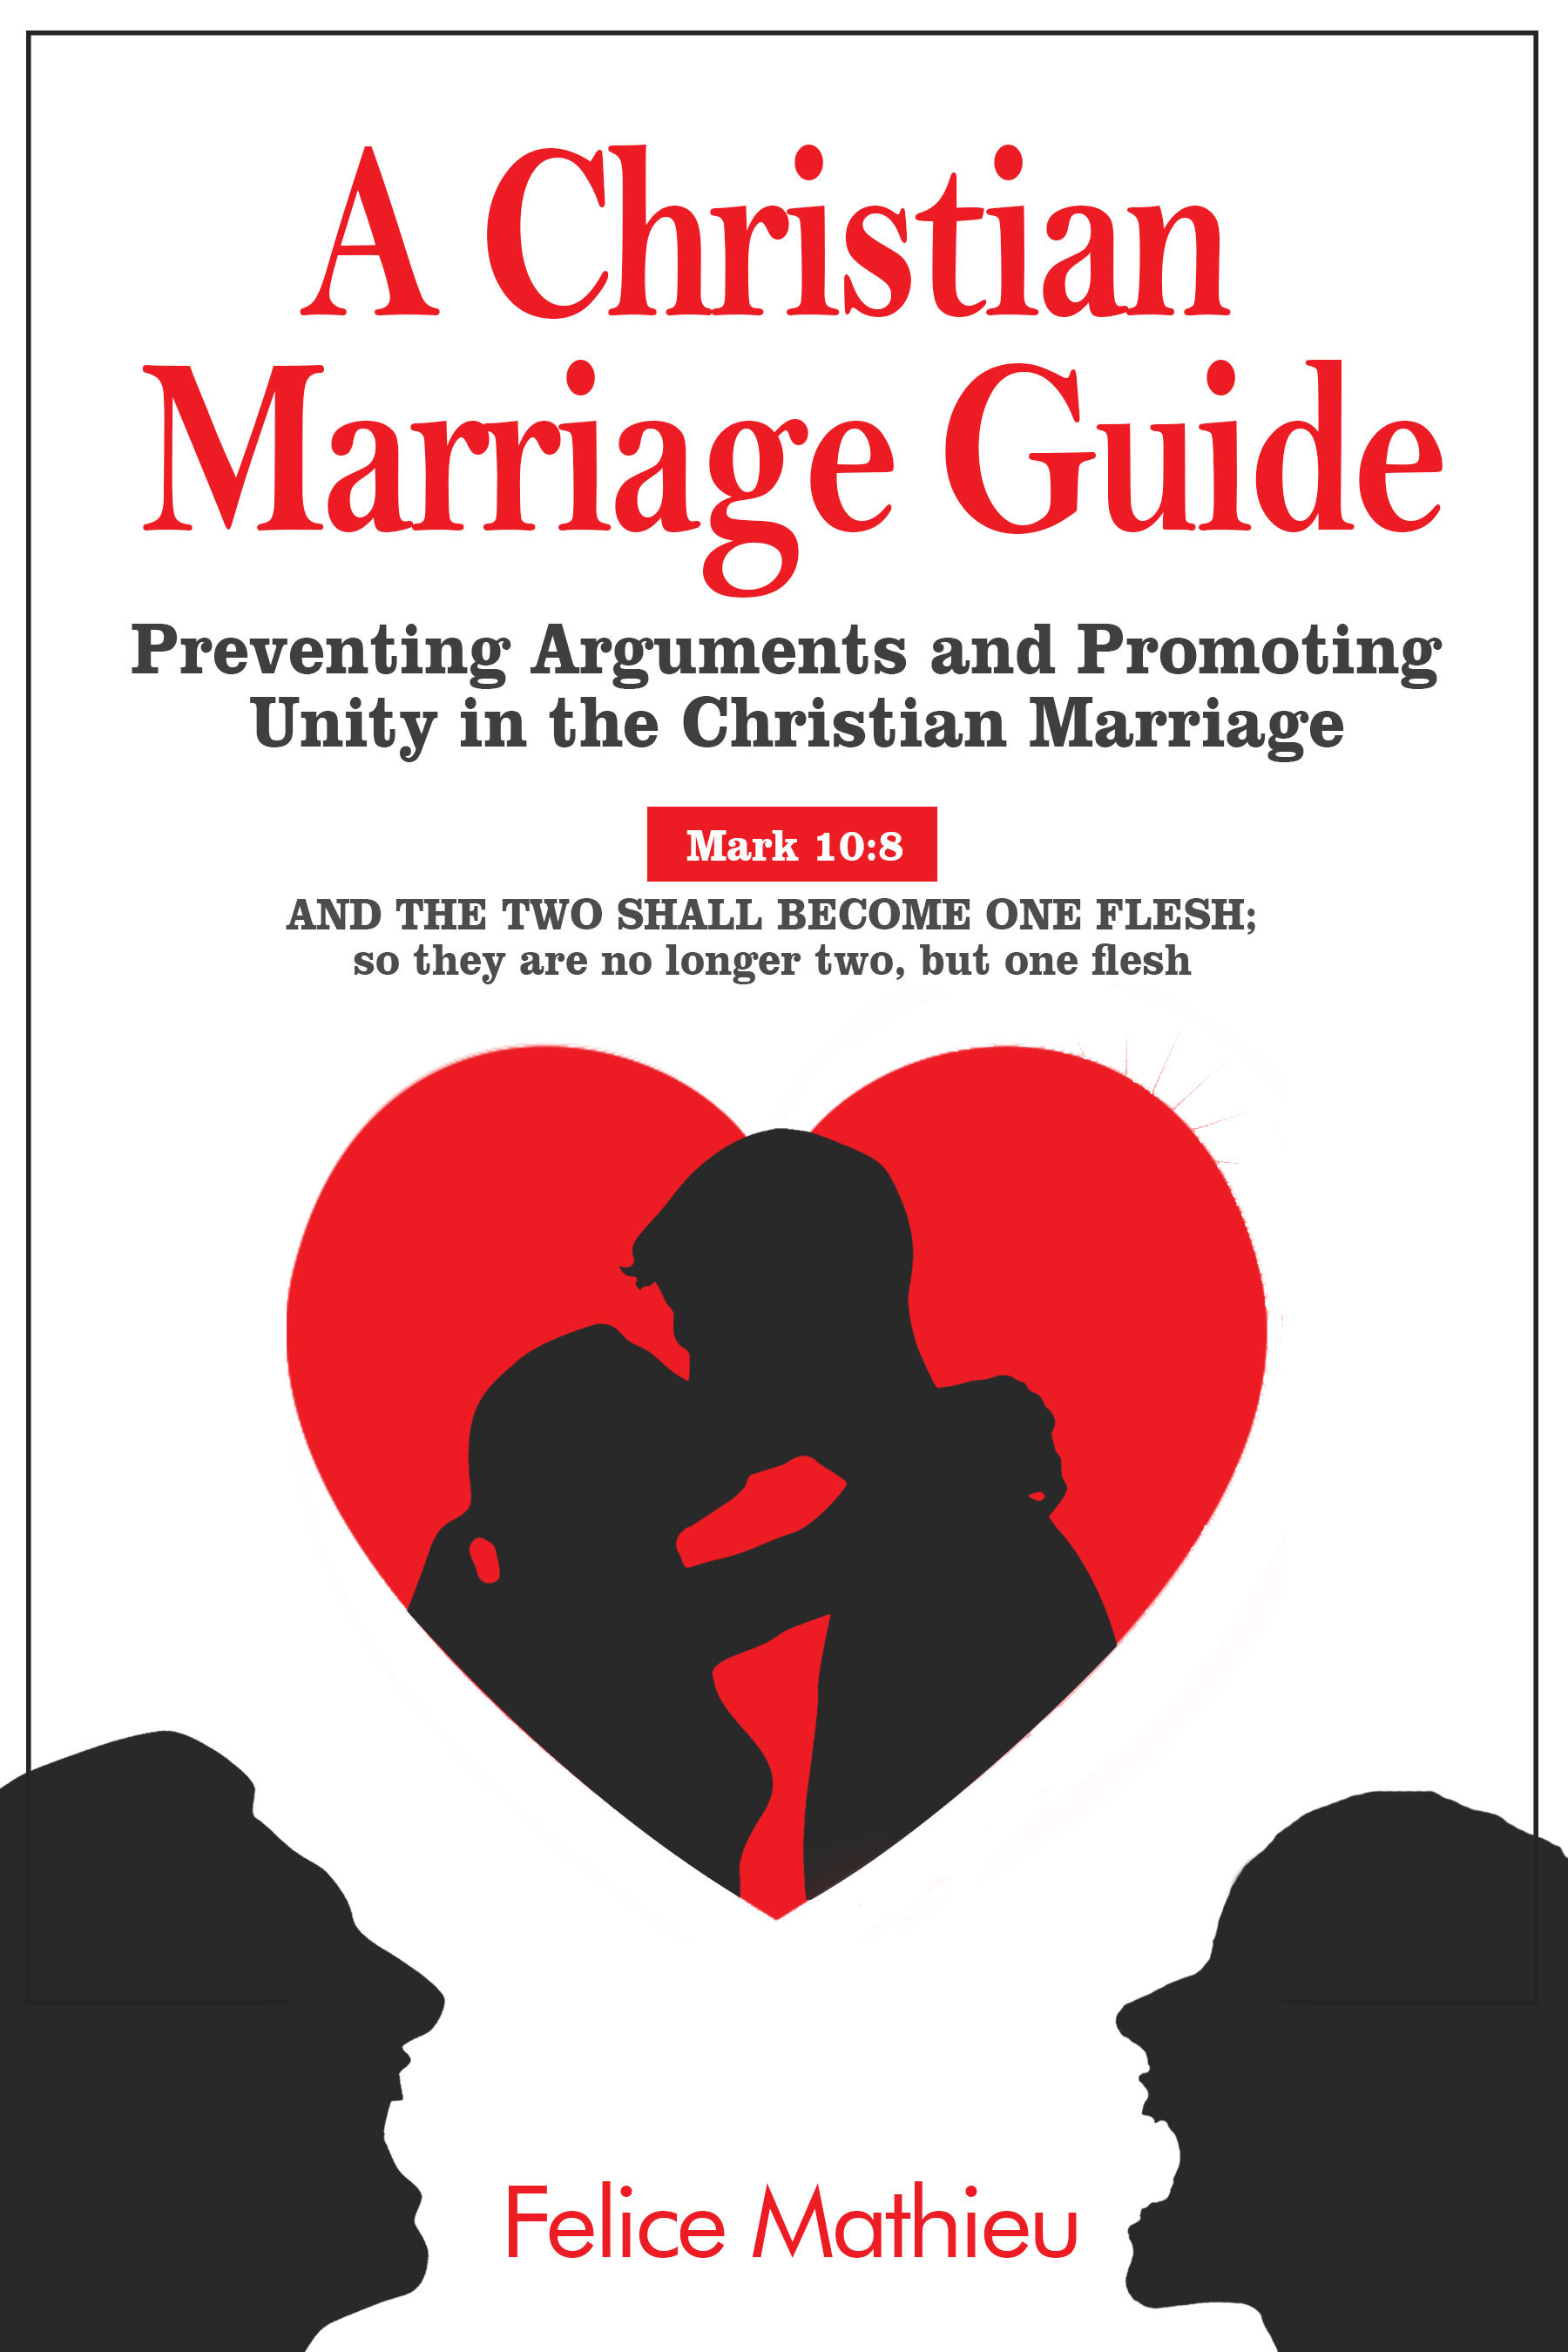 Married As One LLC Offers a Christian Marriage Guide to Help Spouses Improve Communication During Coronavirus Quarantine